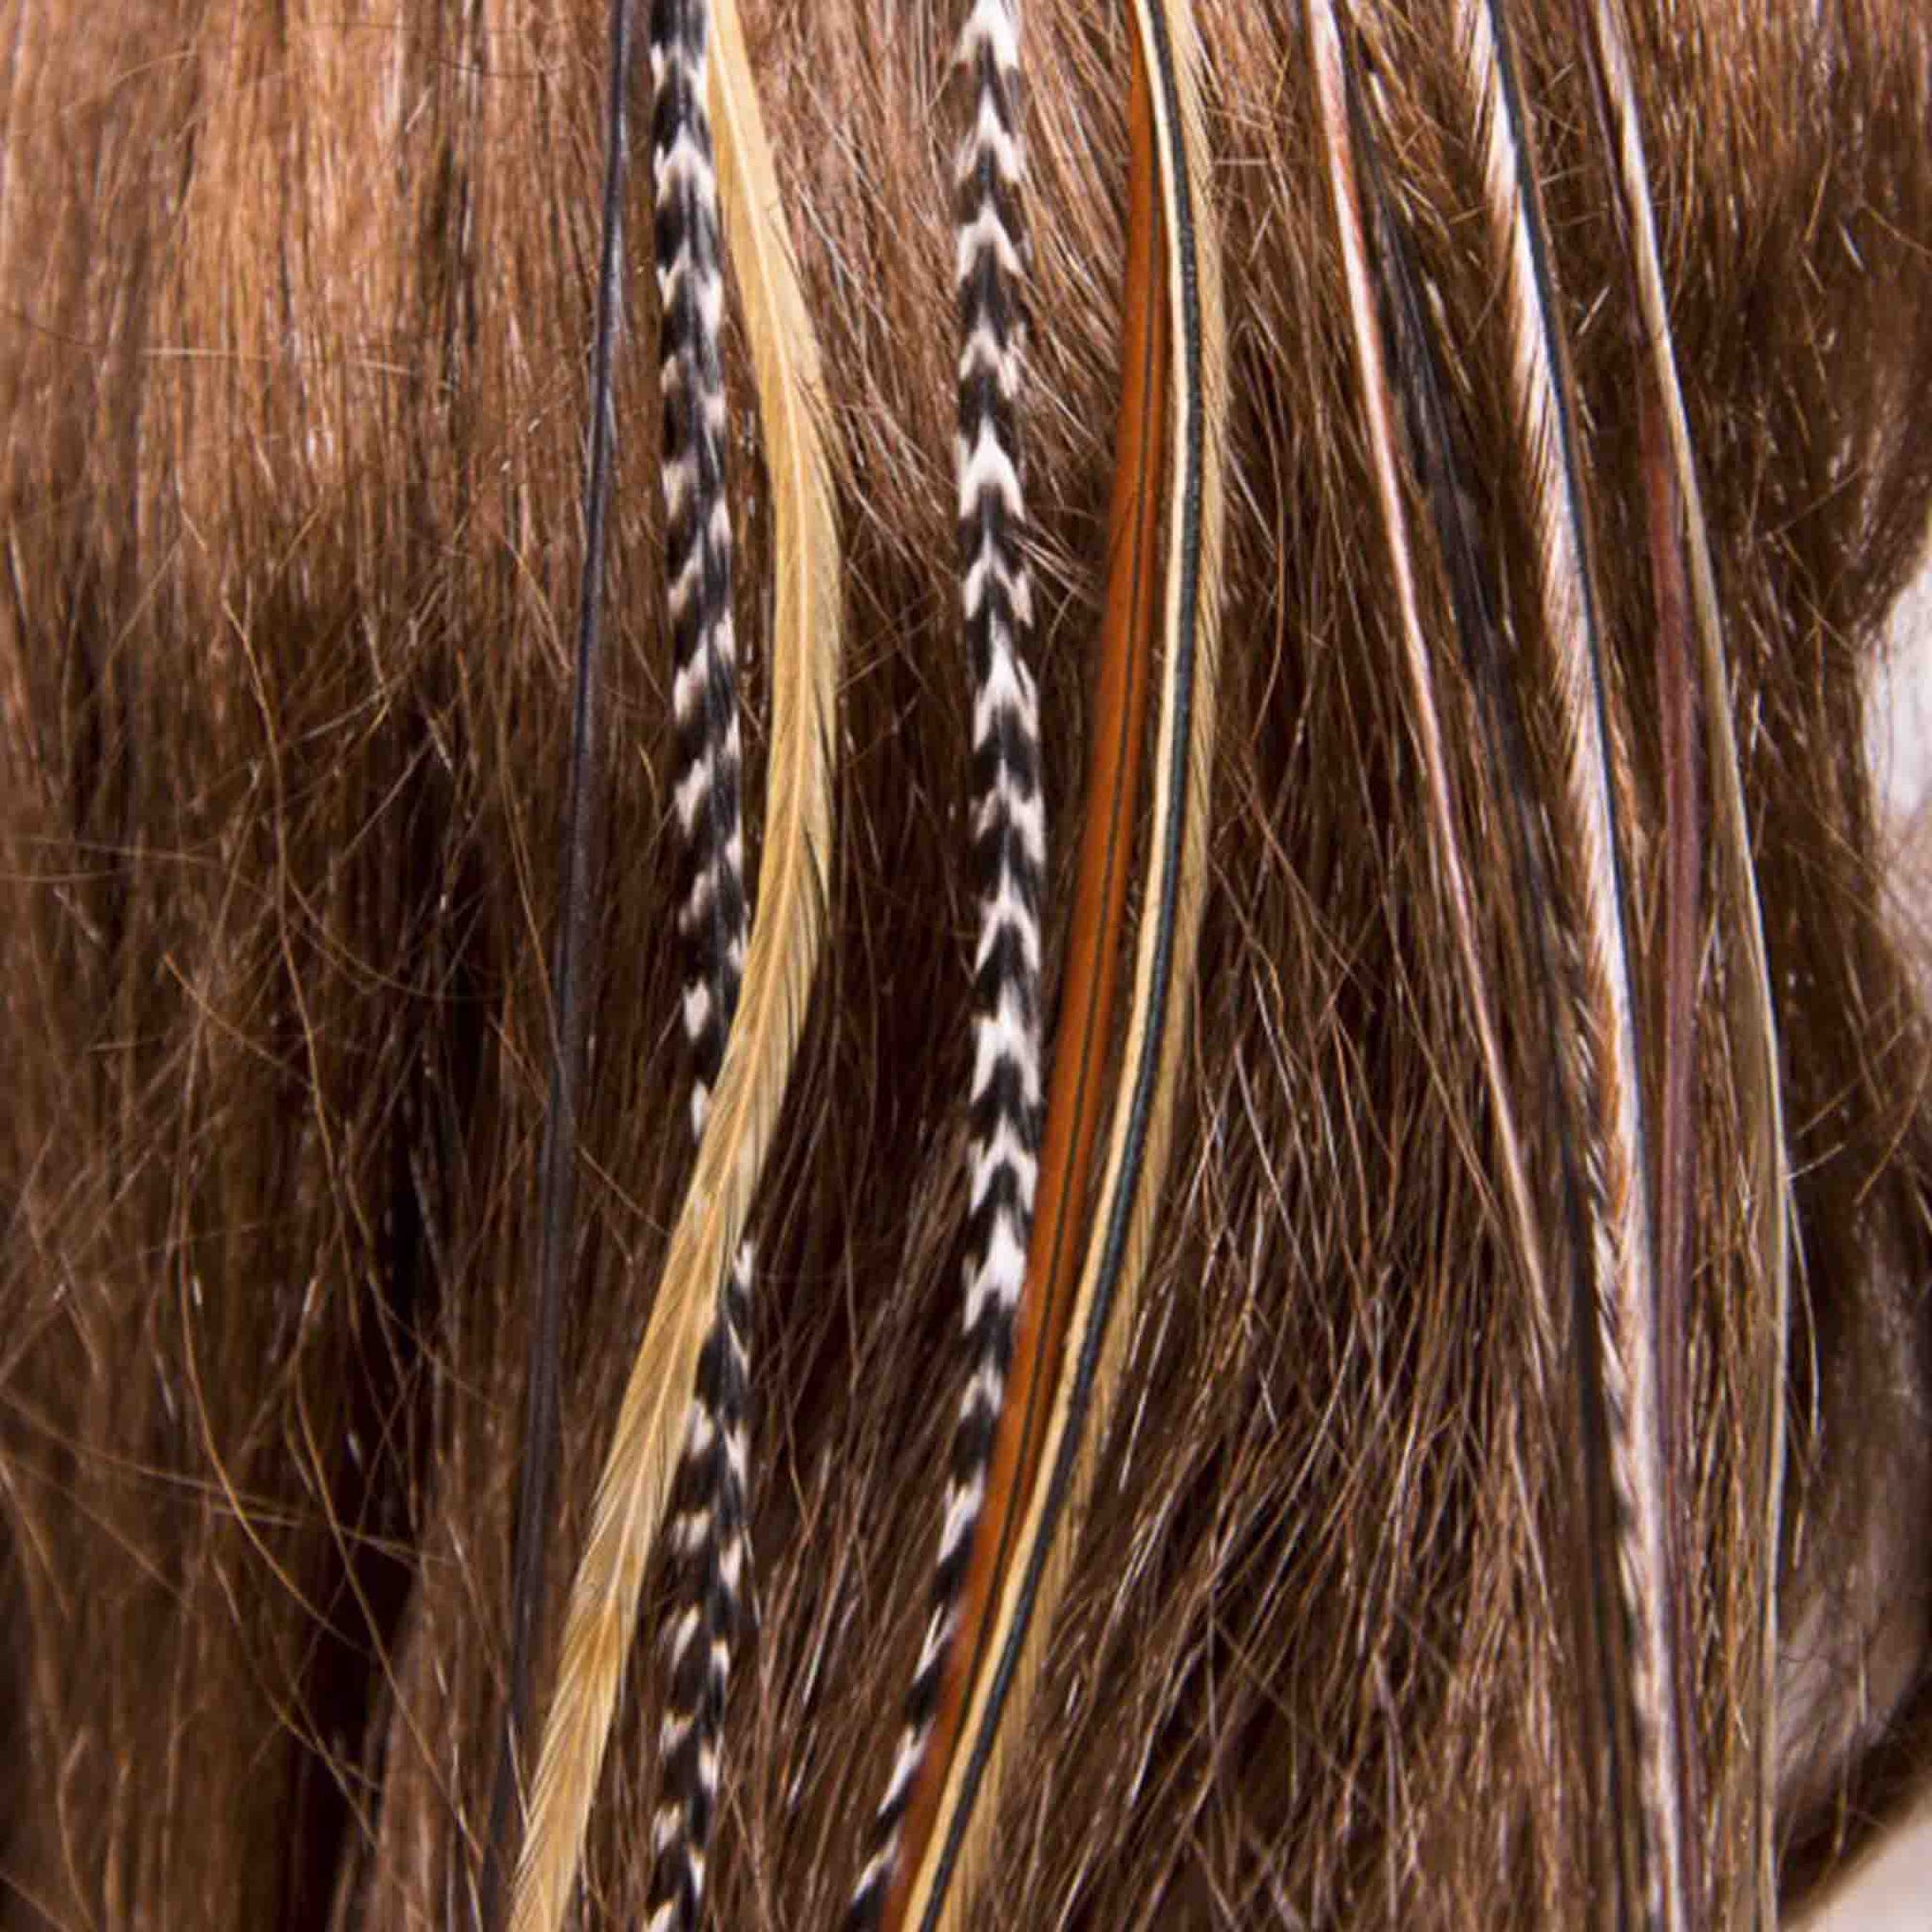 Feather extensions - Natural color feathers - Hair